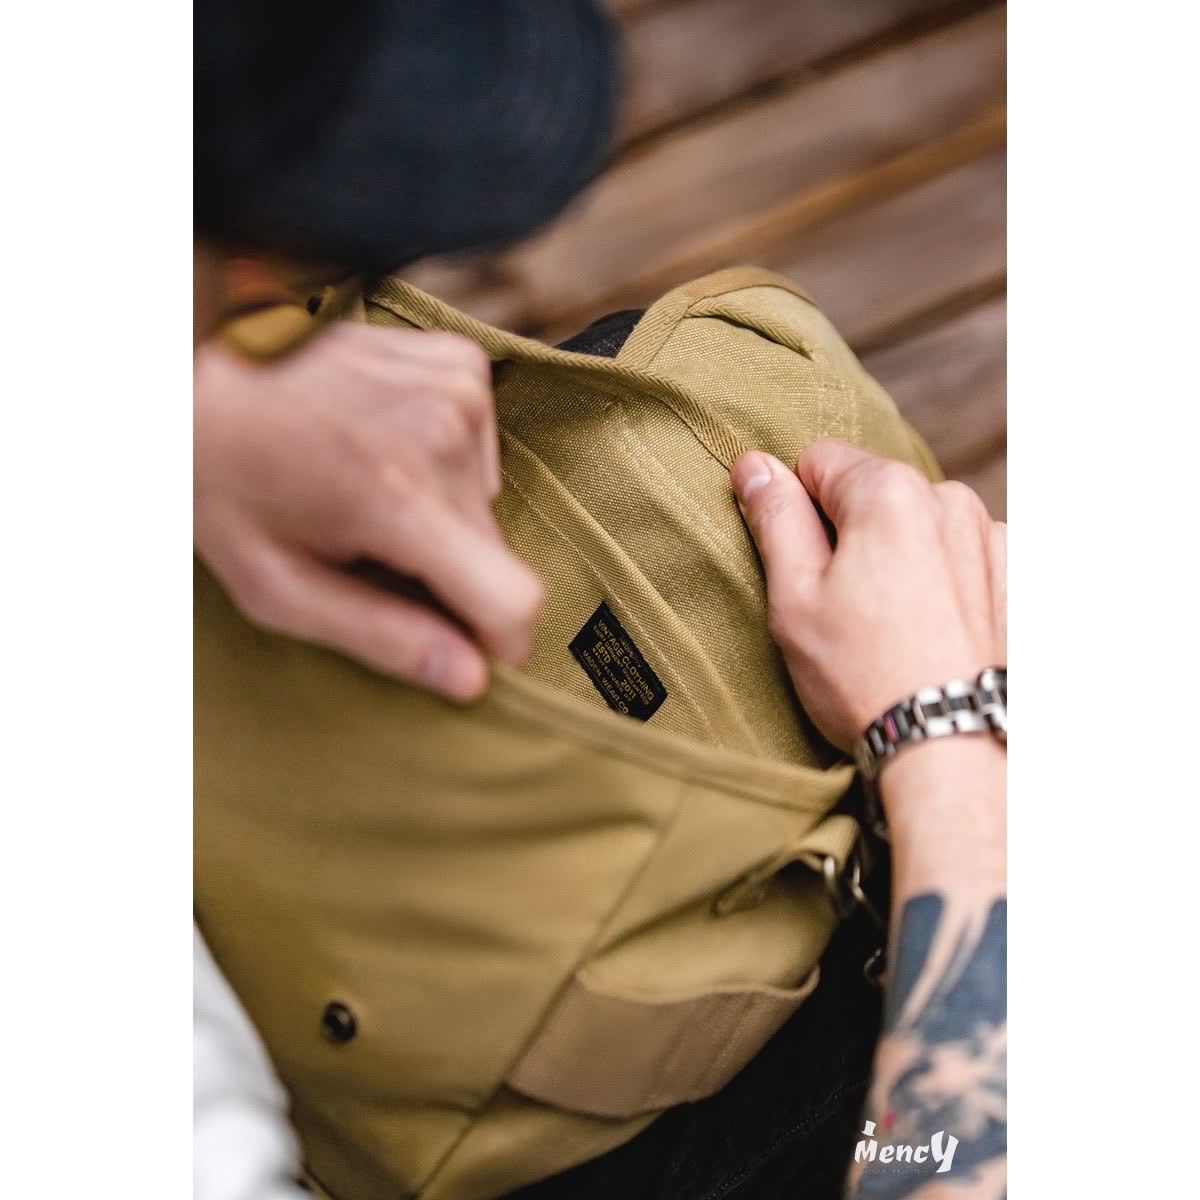 M-1961 reproduction canvas field pack